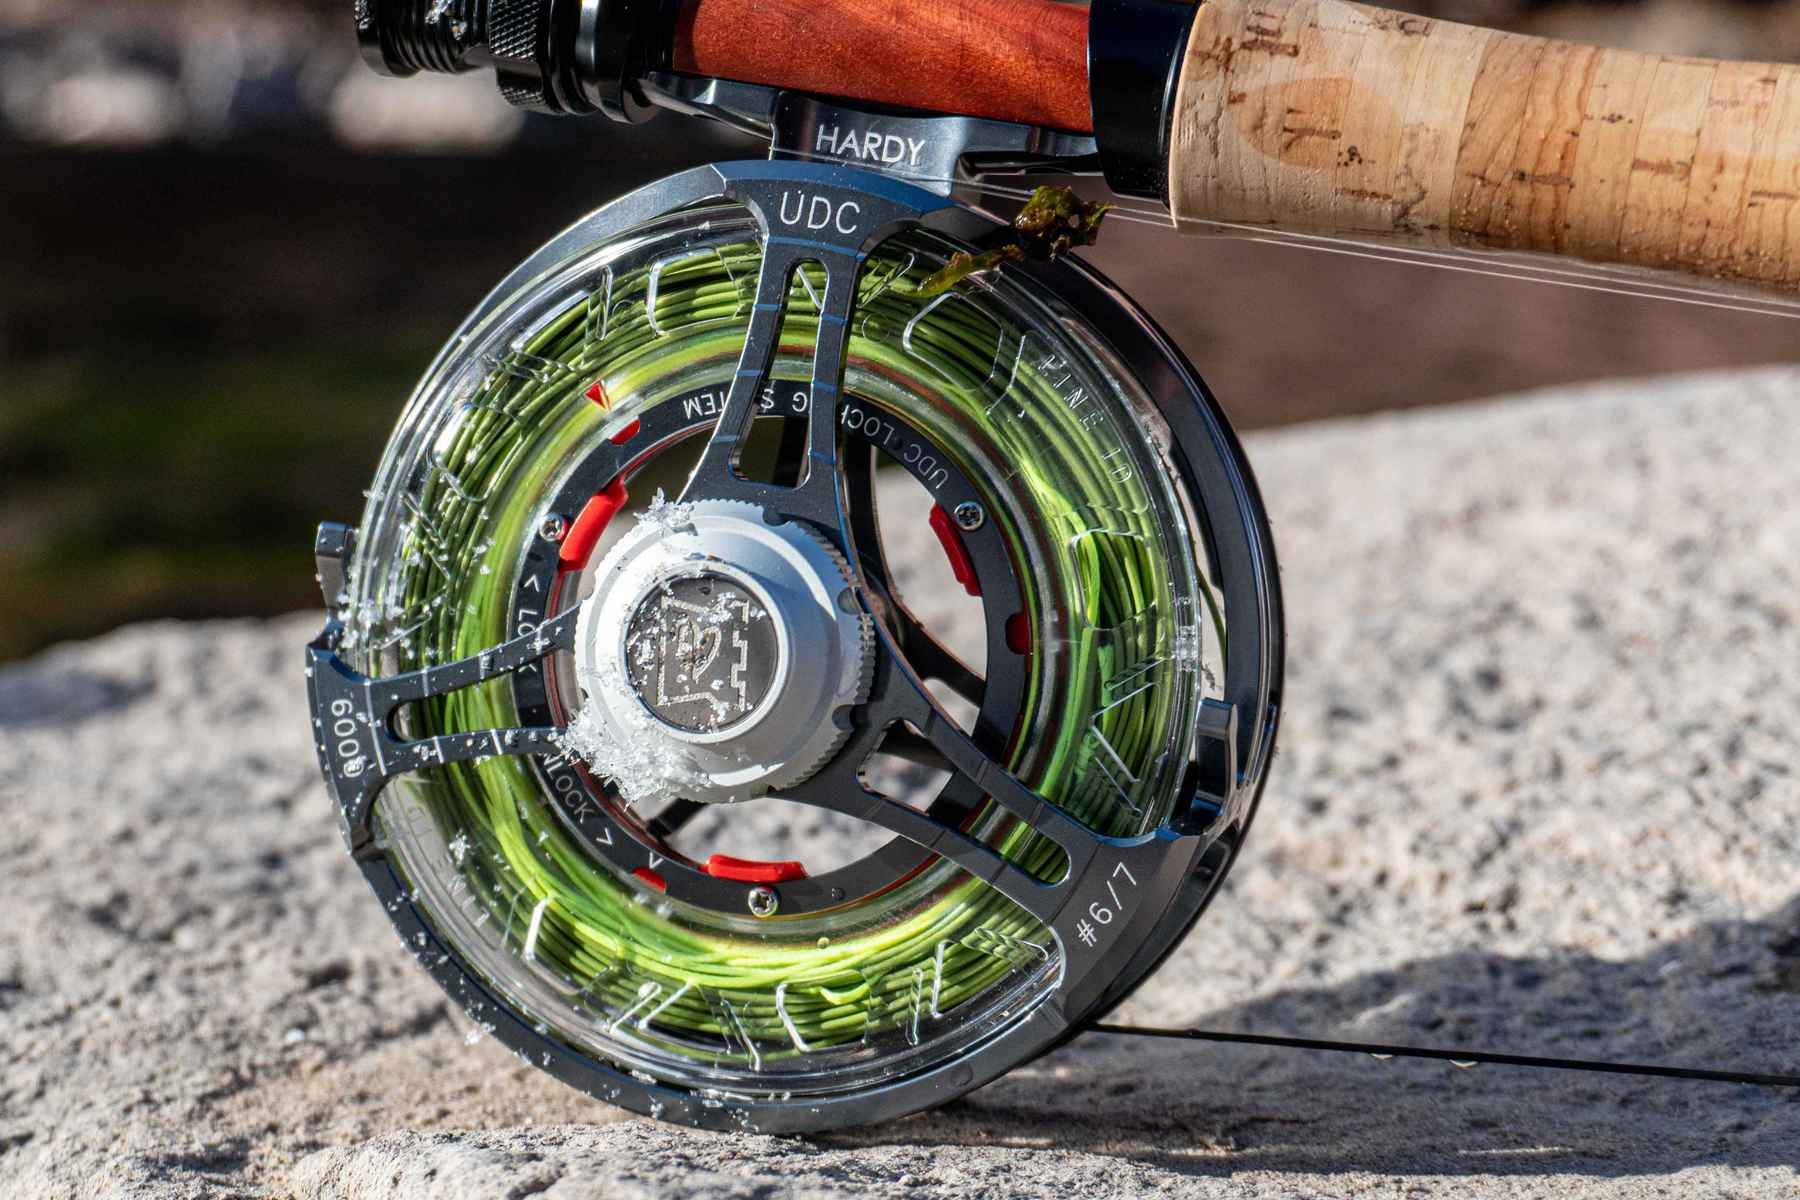 Who want to win a Hardy Fly Reel?